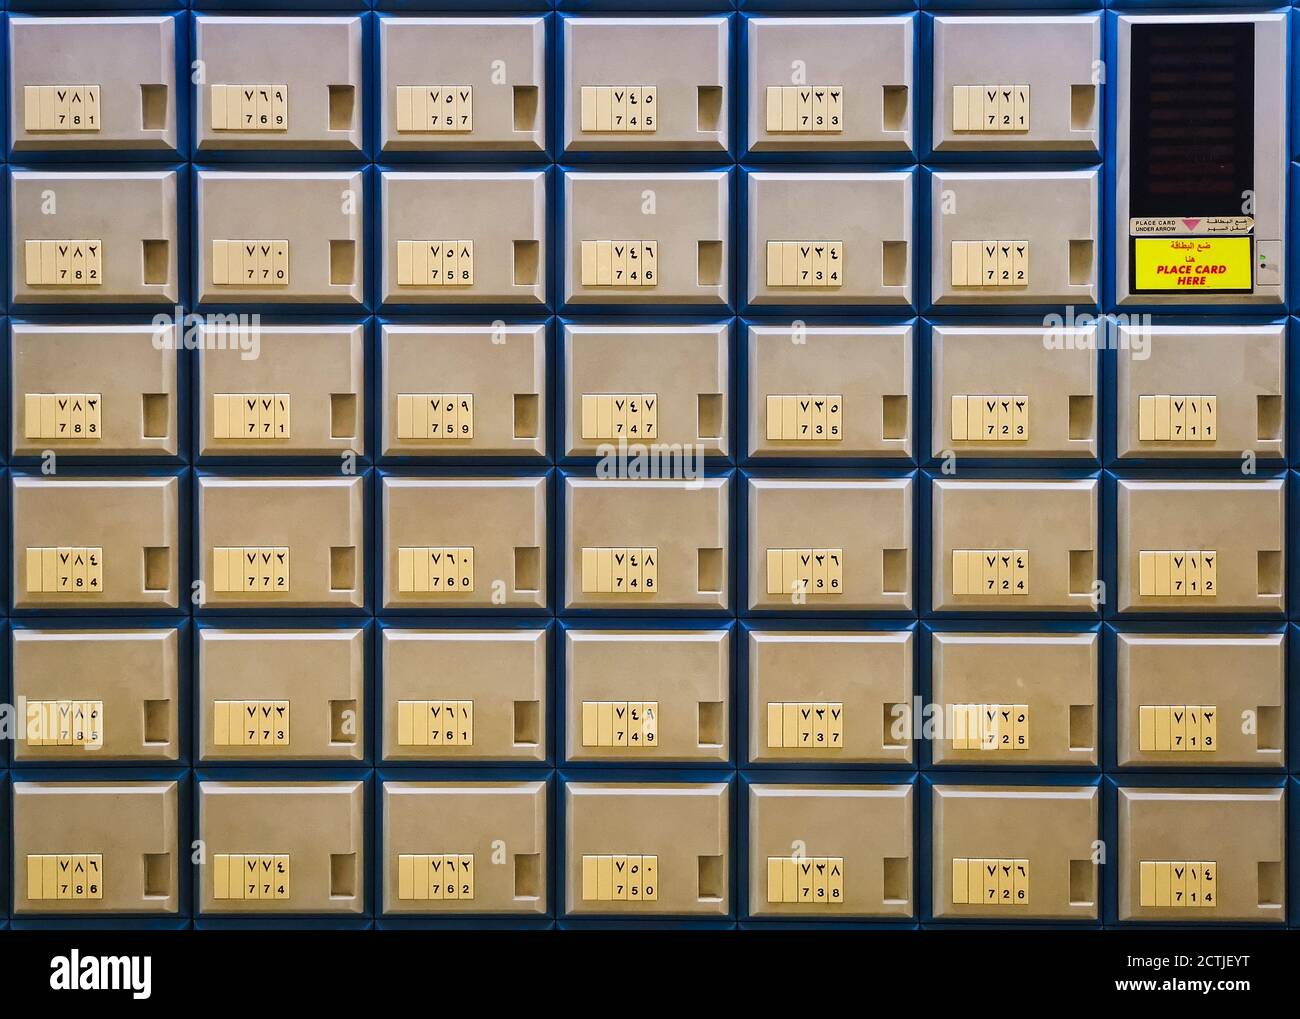 Multiple rows of golden post office boxes with numbers in Arabic and English and card reader close up view Stock Photo